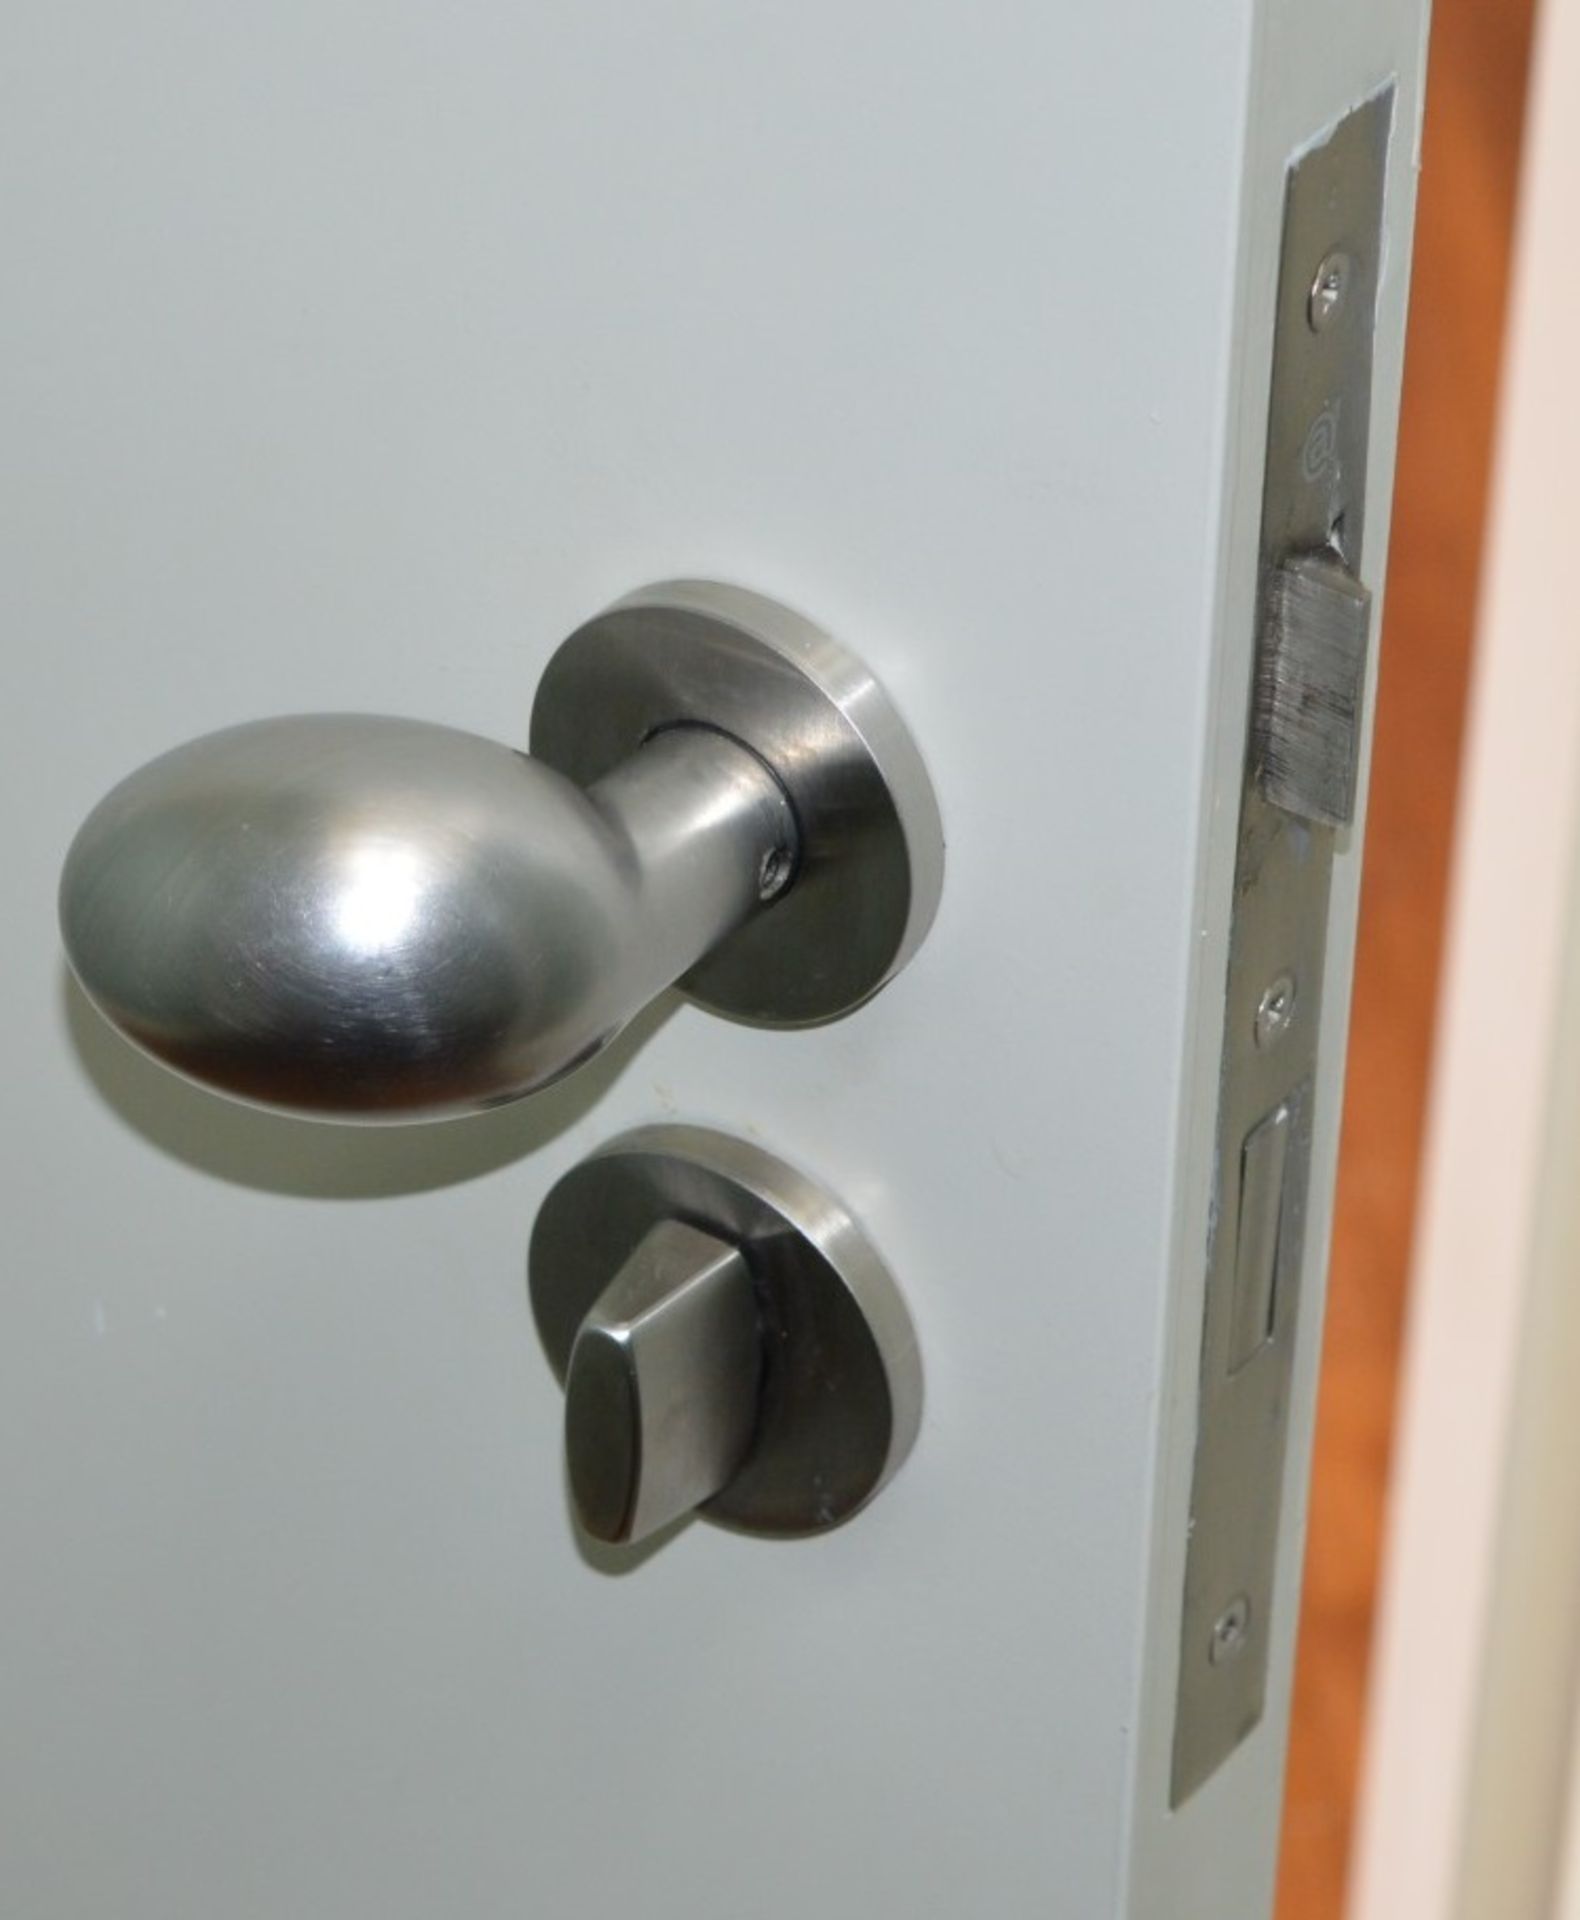 1 x Fire Resistant Internal Door - Fitted With Stylish Chrome Door Knobs, Triple Hinges and - Image 4 of 5